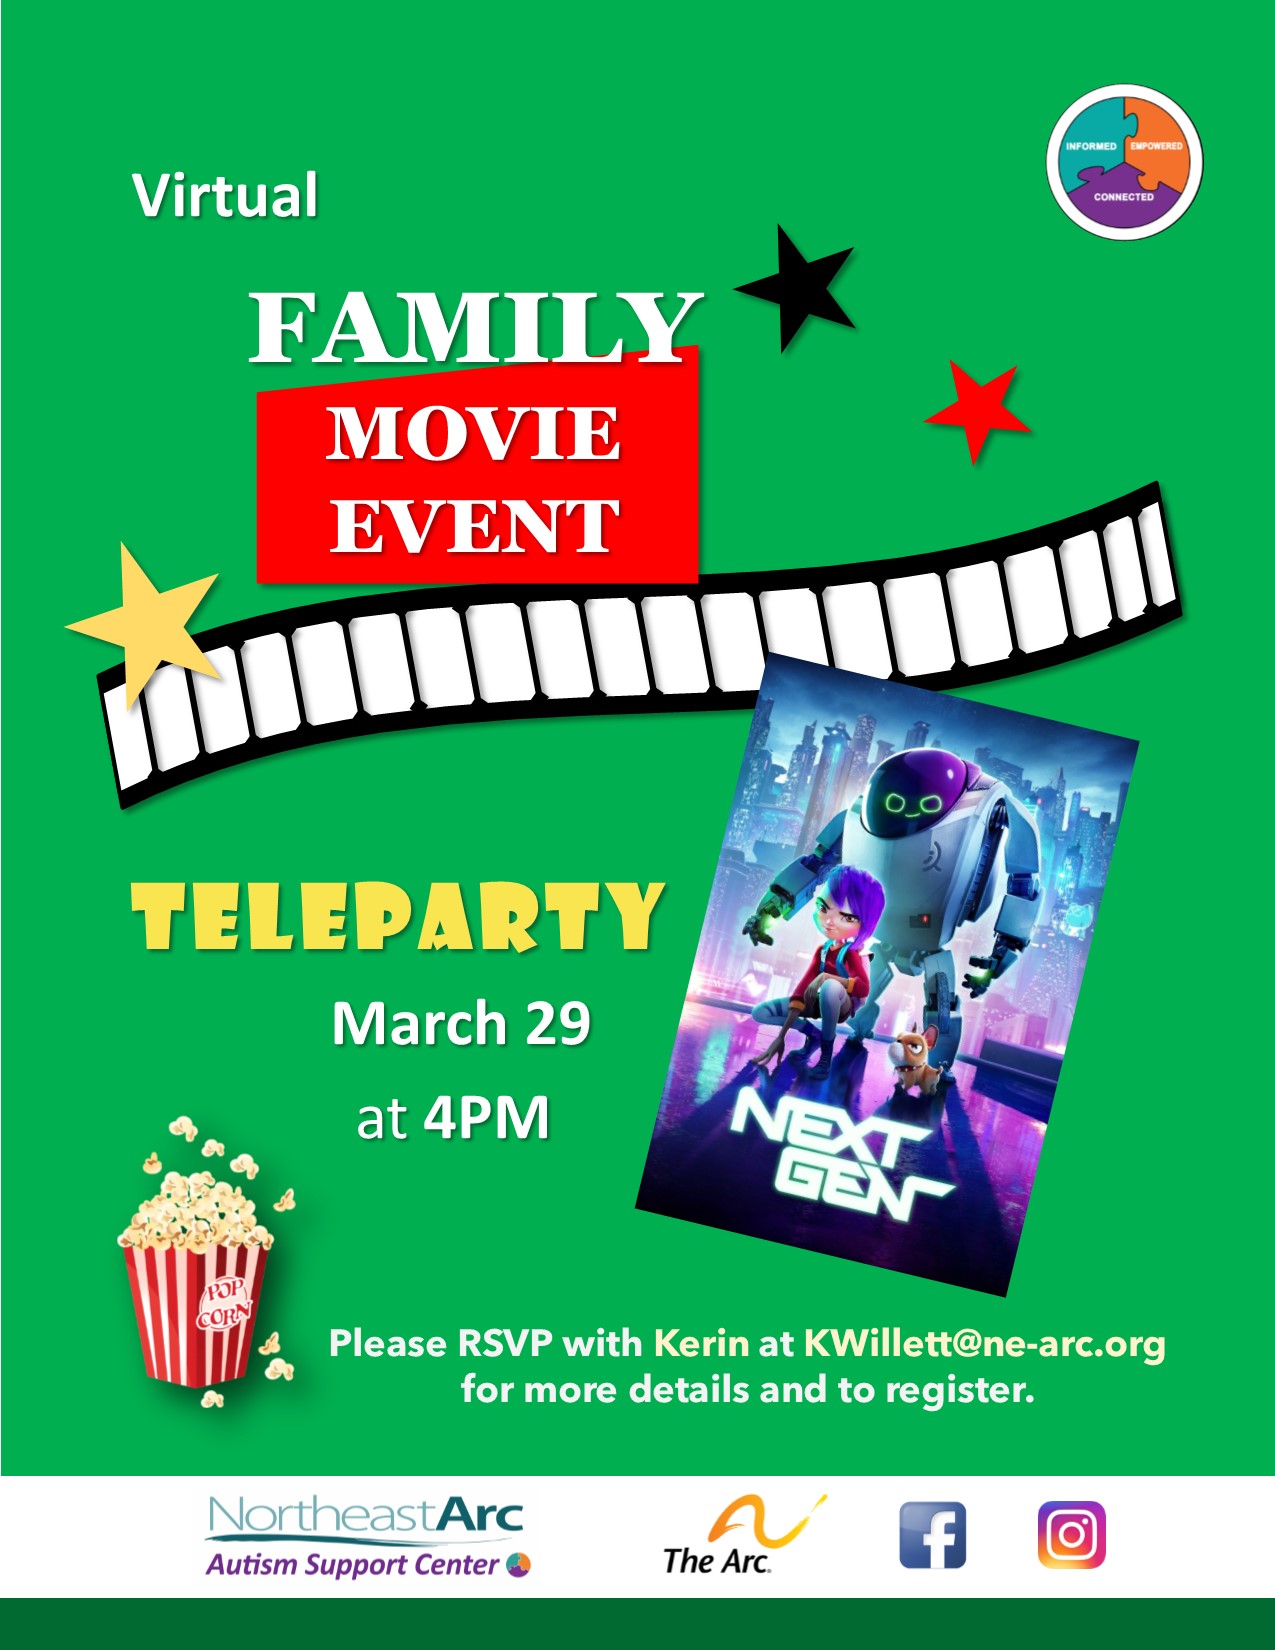 Autism Support Center Virtual Family Movie Event. Teleparty on March 29 at 4PM featuring the movie Next Gen. RSVP Kerin at KWillett@ne-arc.org to register.